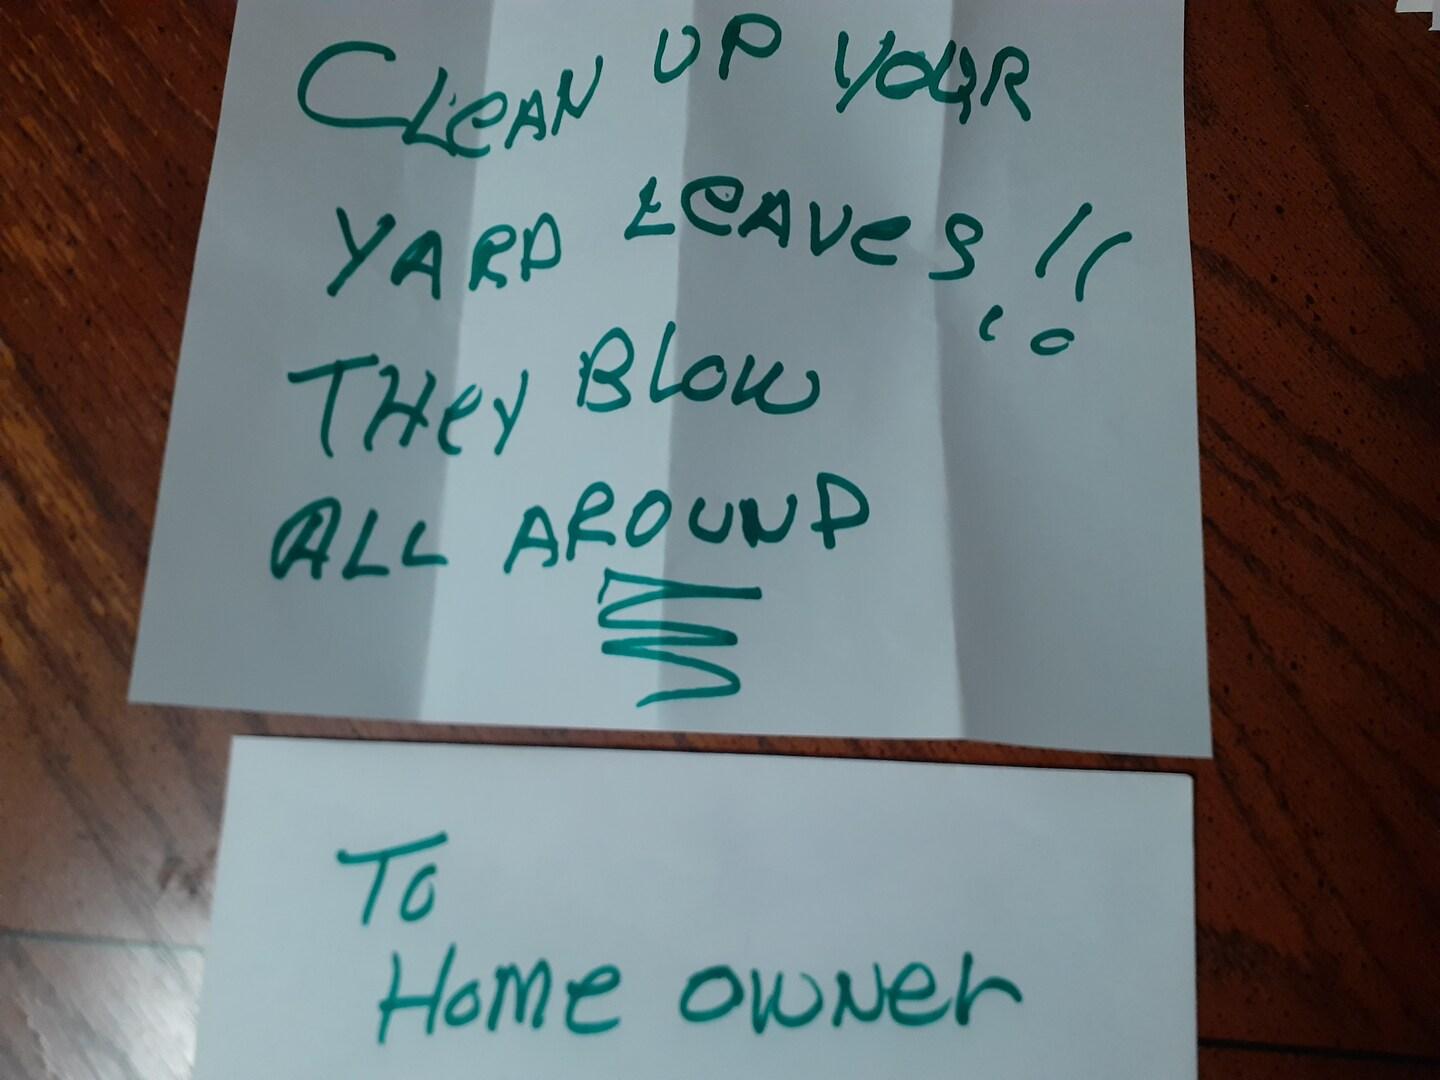 A disabled woman got a note shaming her yard. Neighbors stepped in to help. 